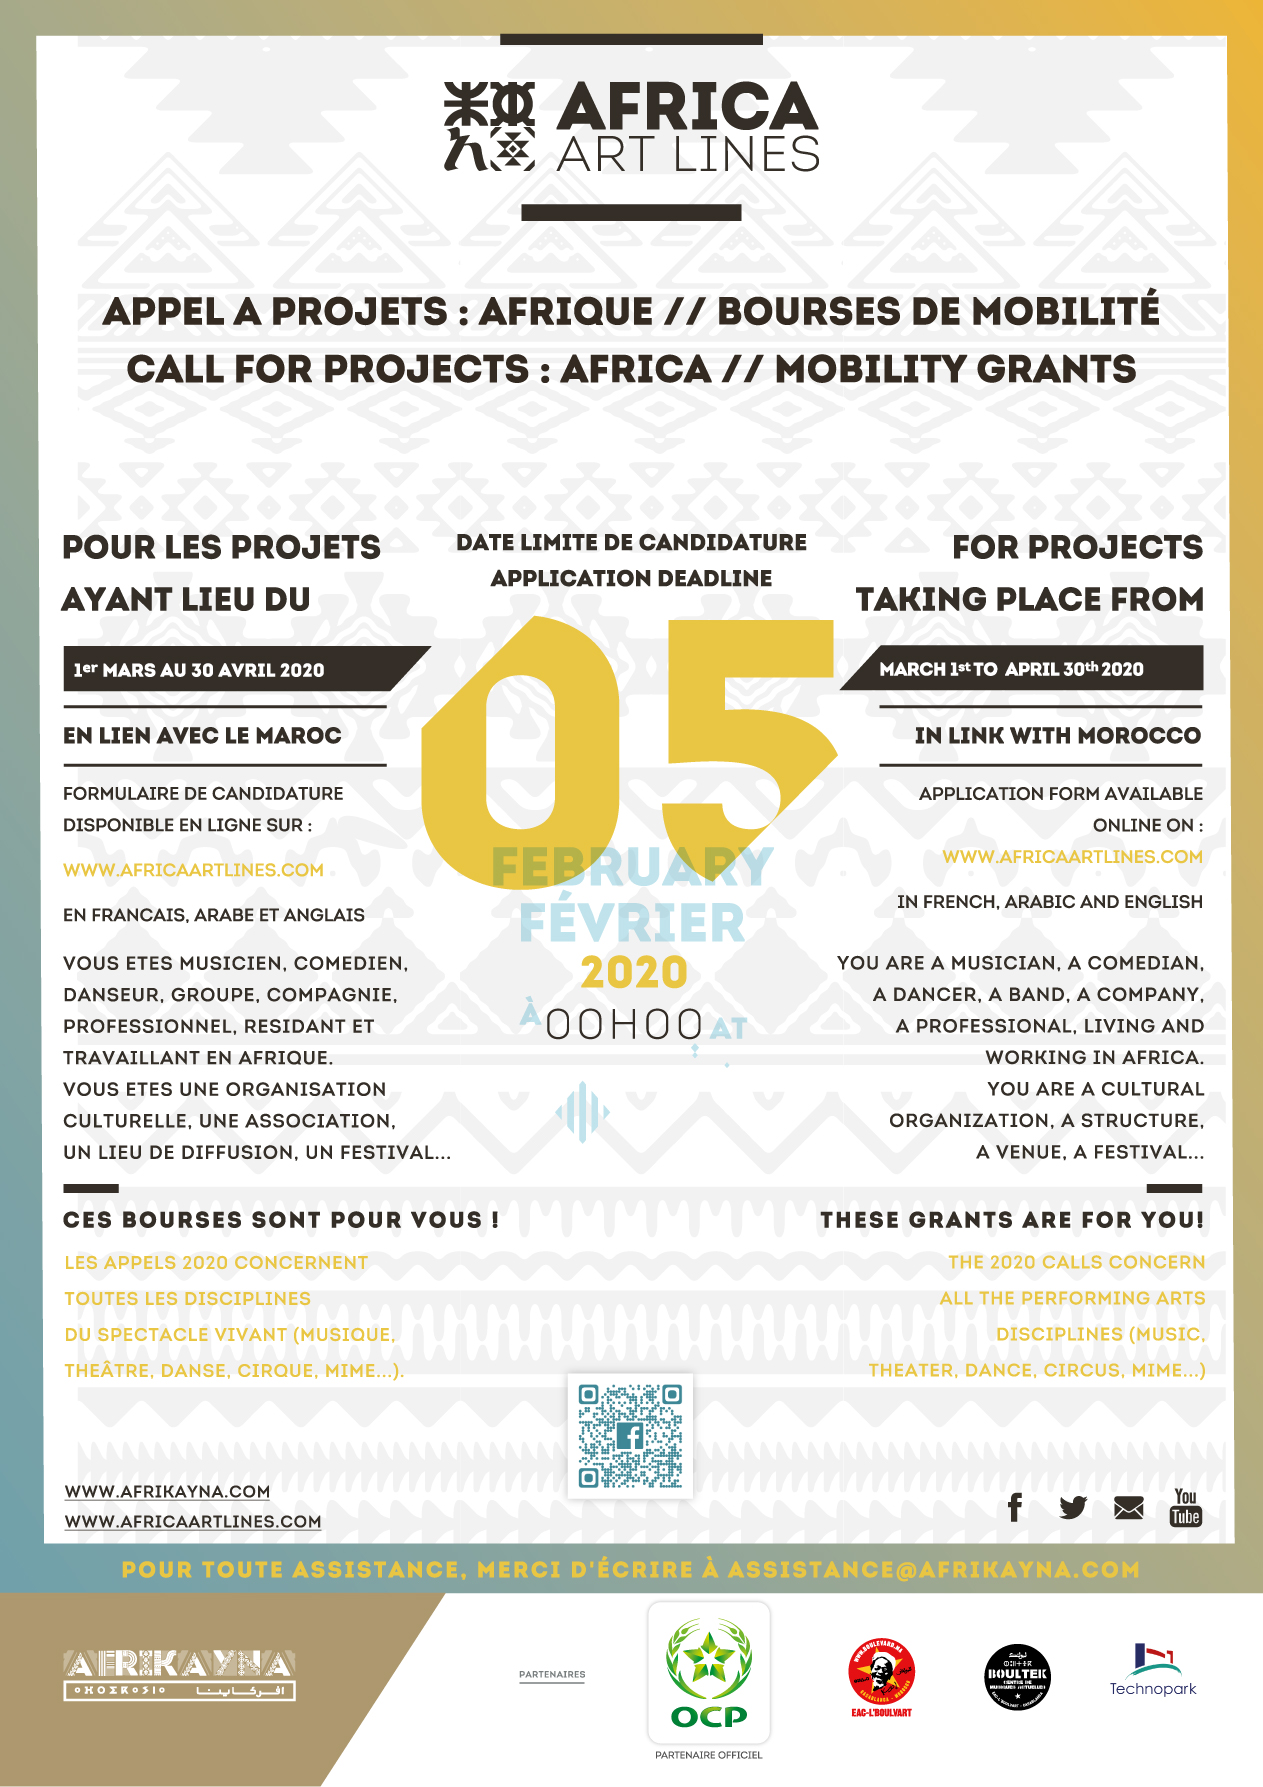 APPEL A PROJETS AFRICA ART LINES N°1 – 2020